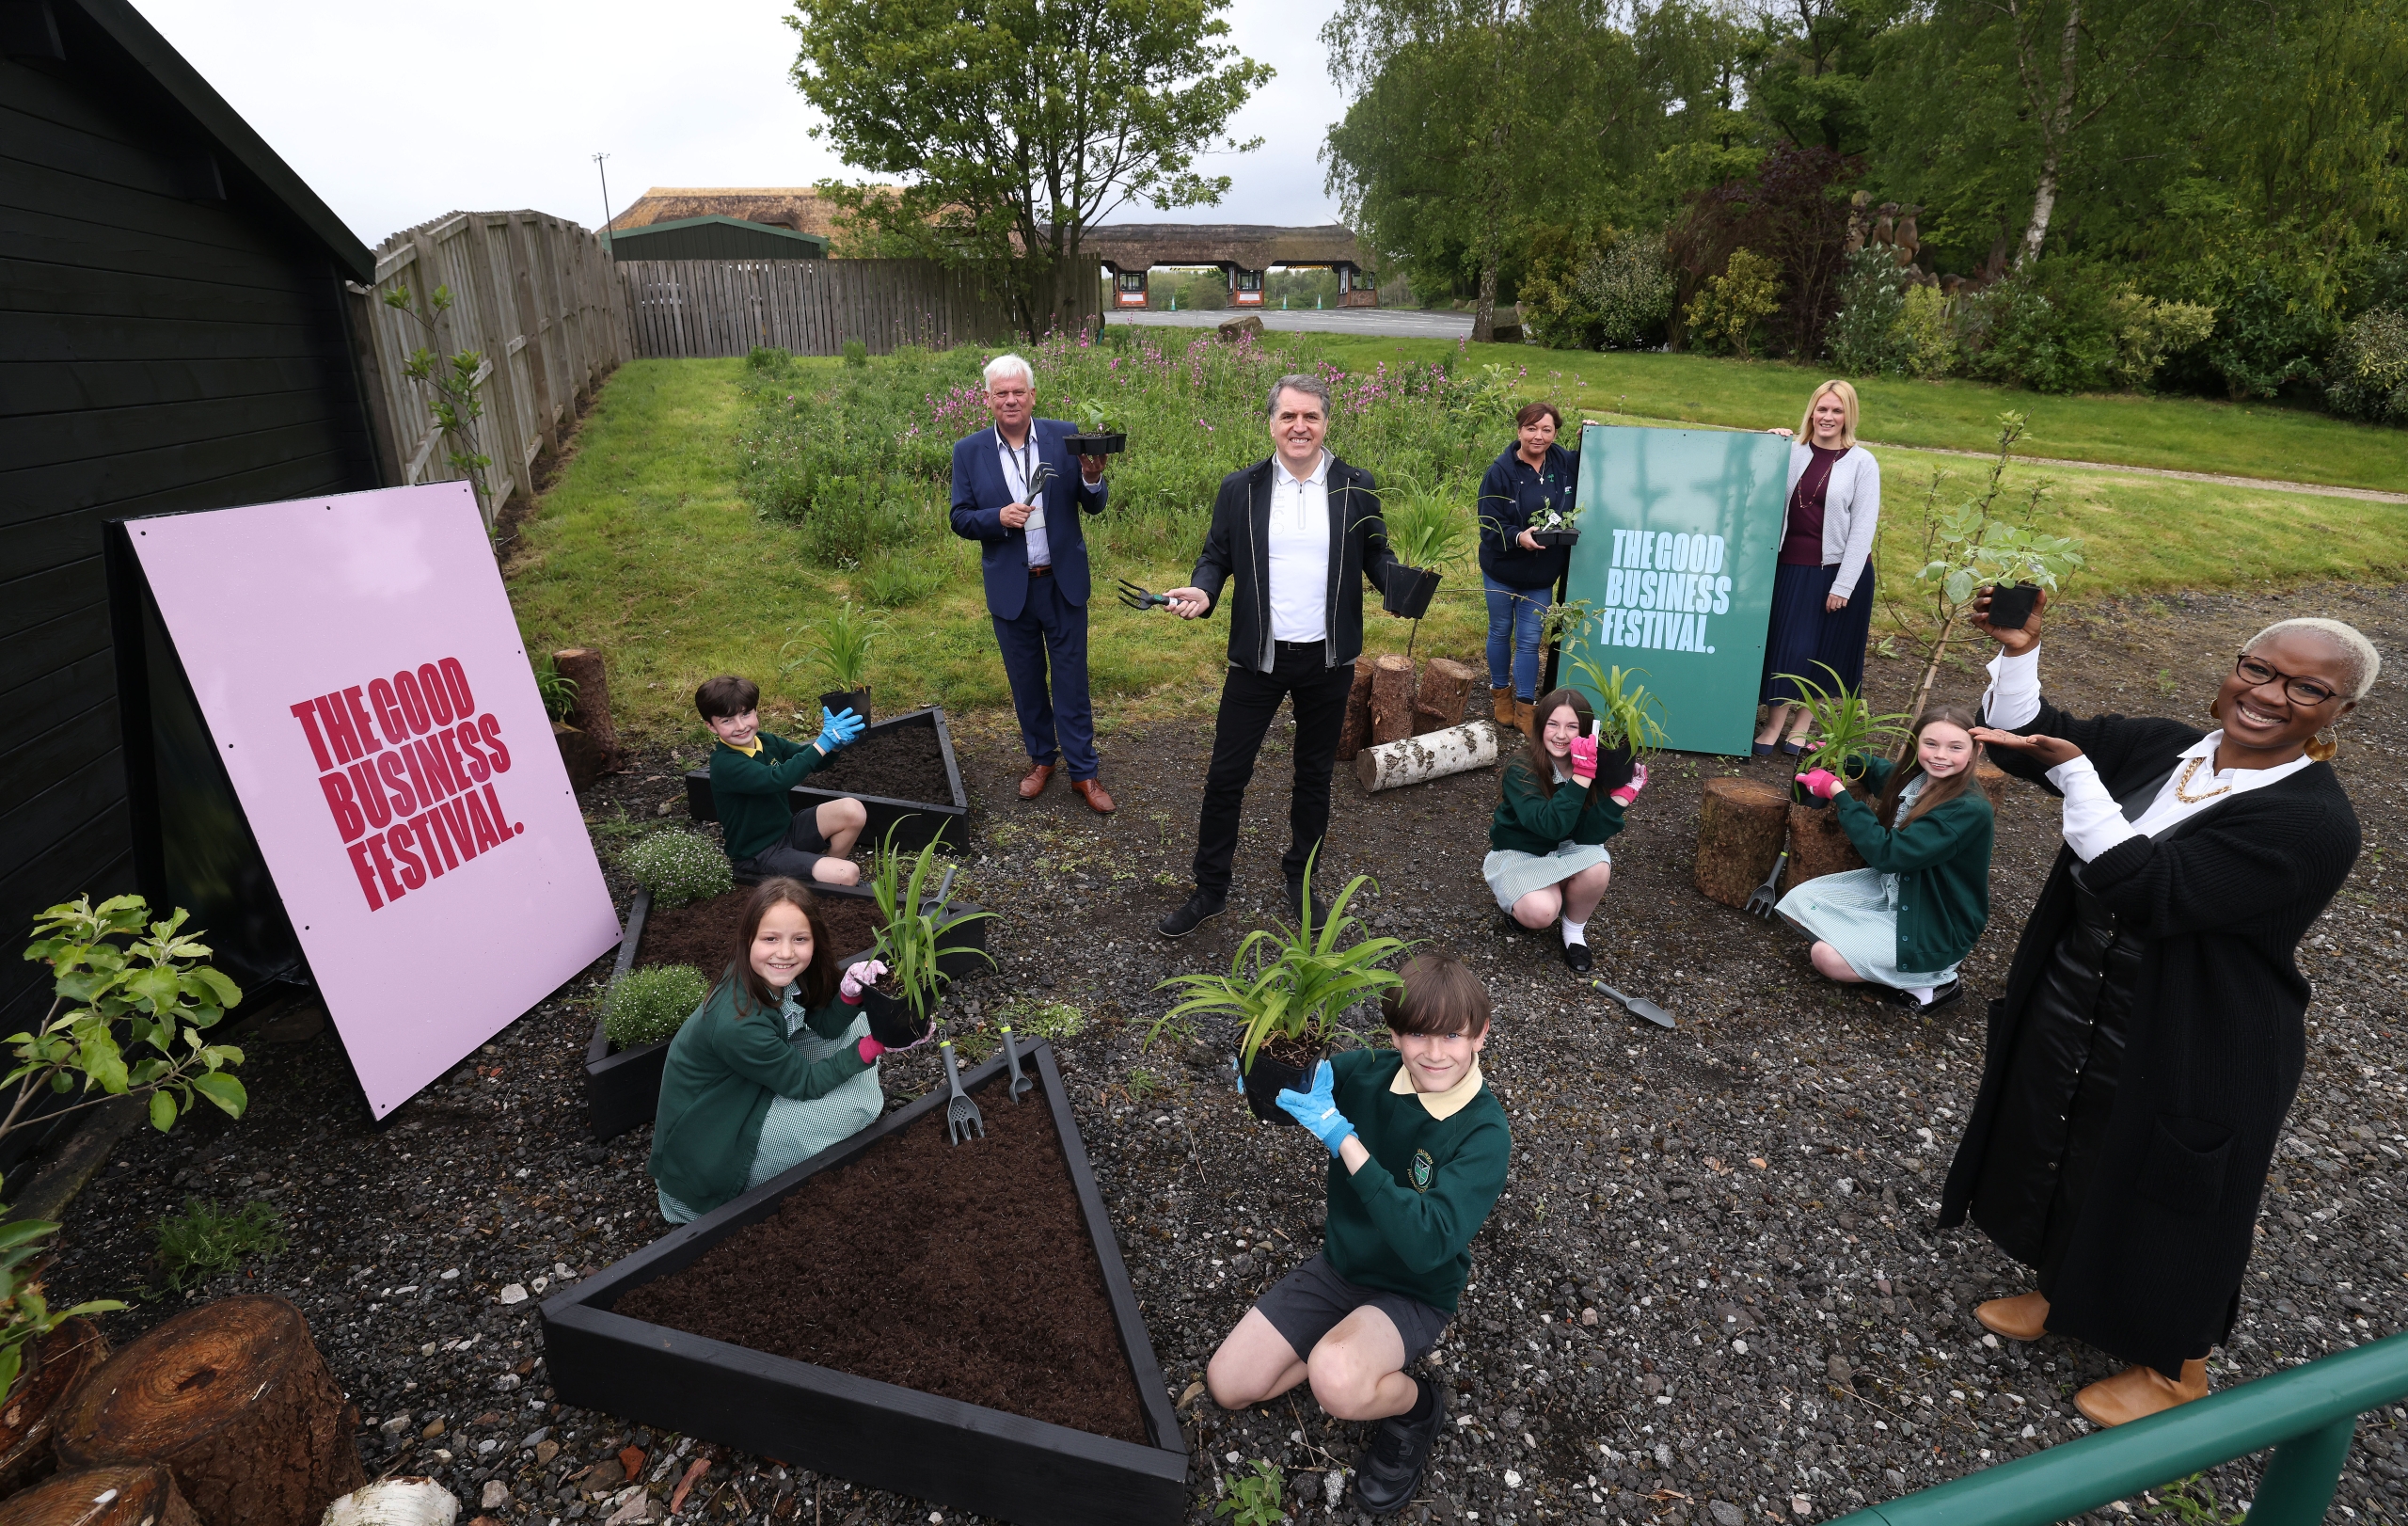 Metro Mayor Steve Rotheram at launch of The Good Business Festival Youth Summit in Knowsley Safari July 2021 standing in a plot of land surrounded by children and good business festival signage